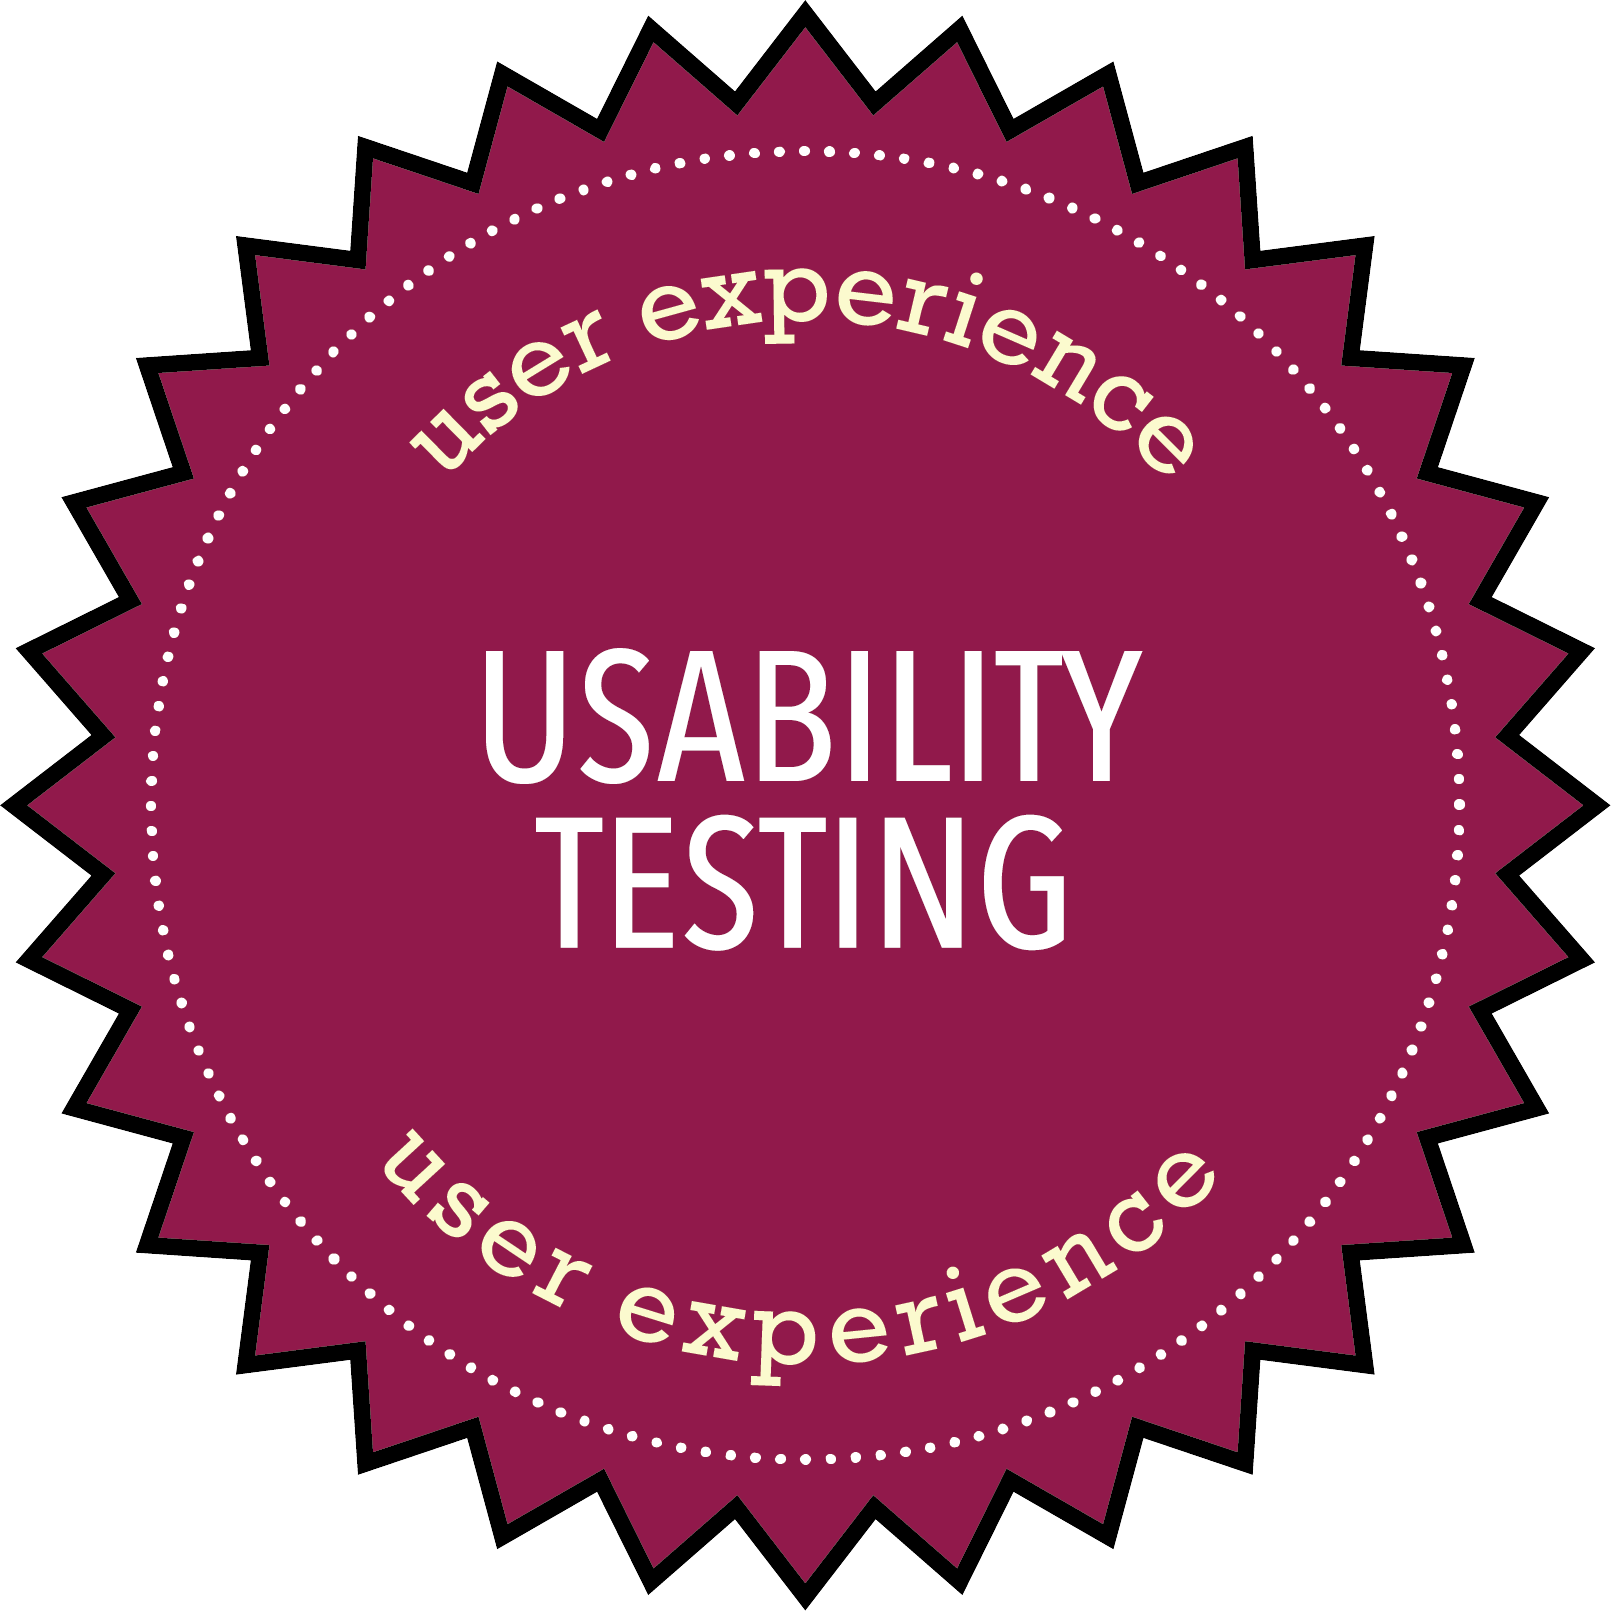 Empowered User Usability Testing